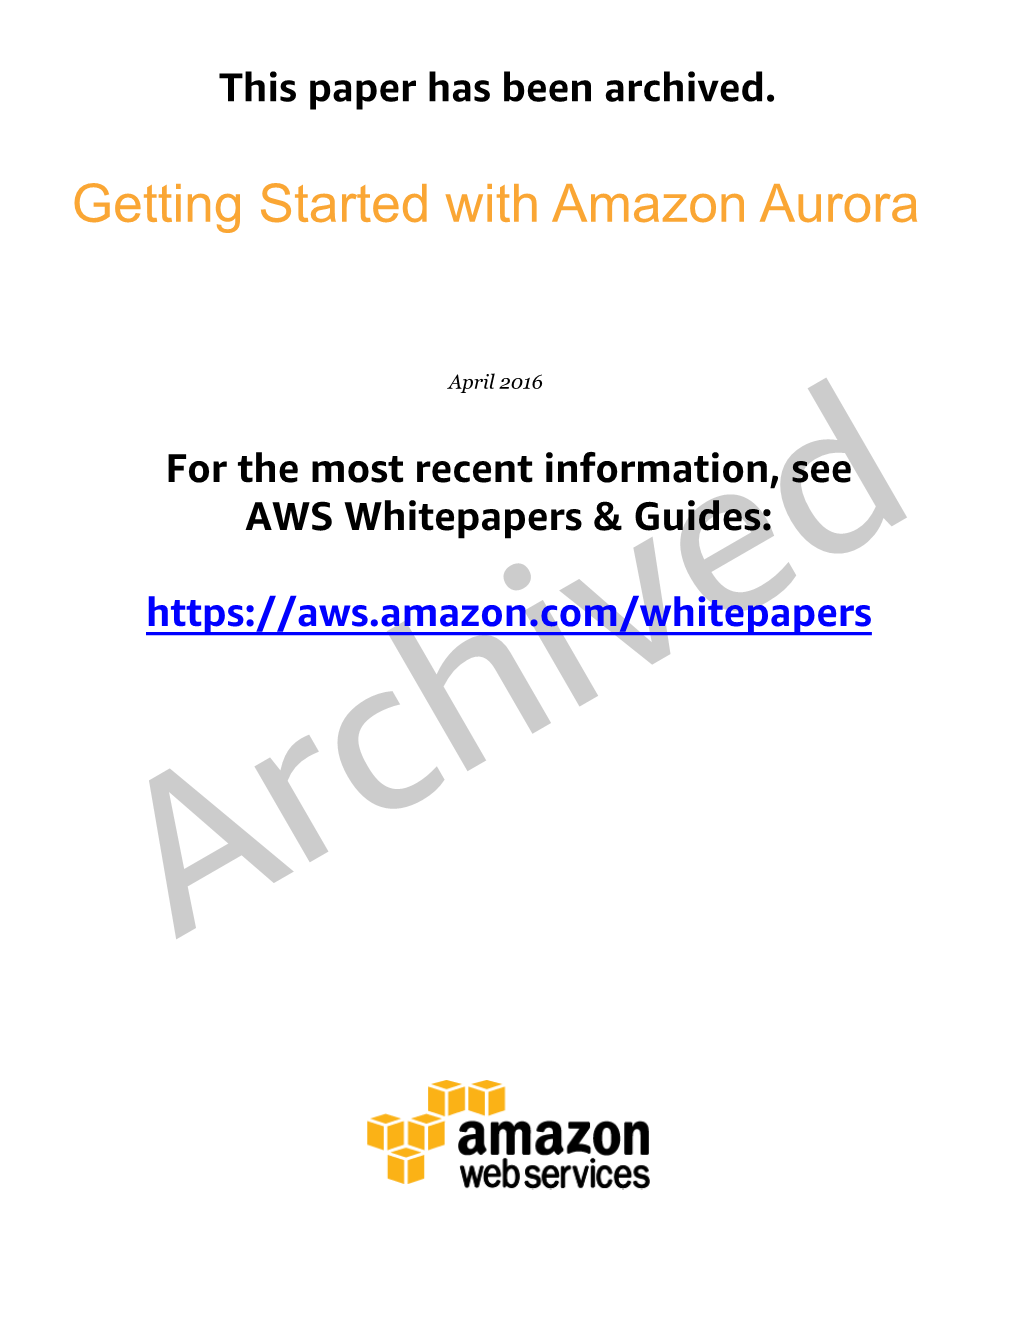 Getting Started with Amazon Aurora